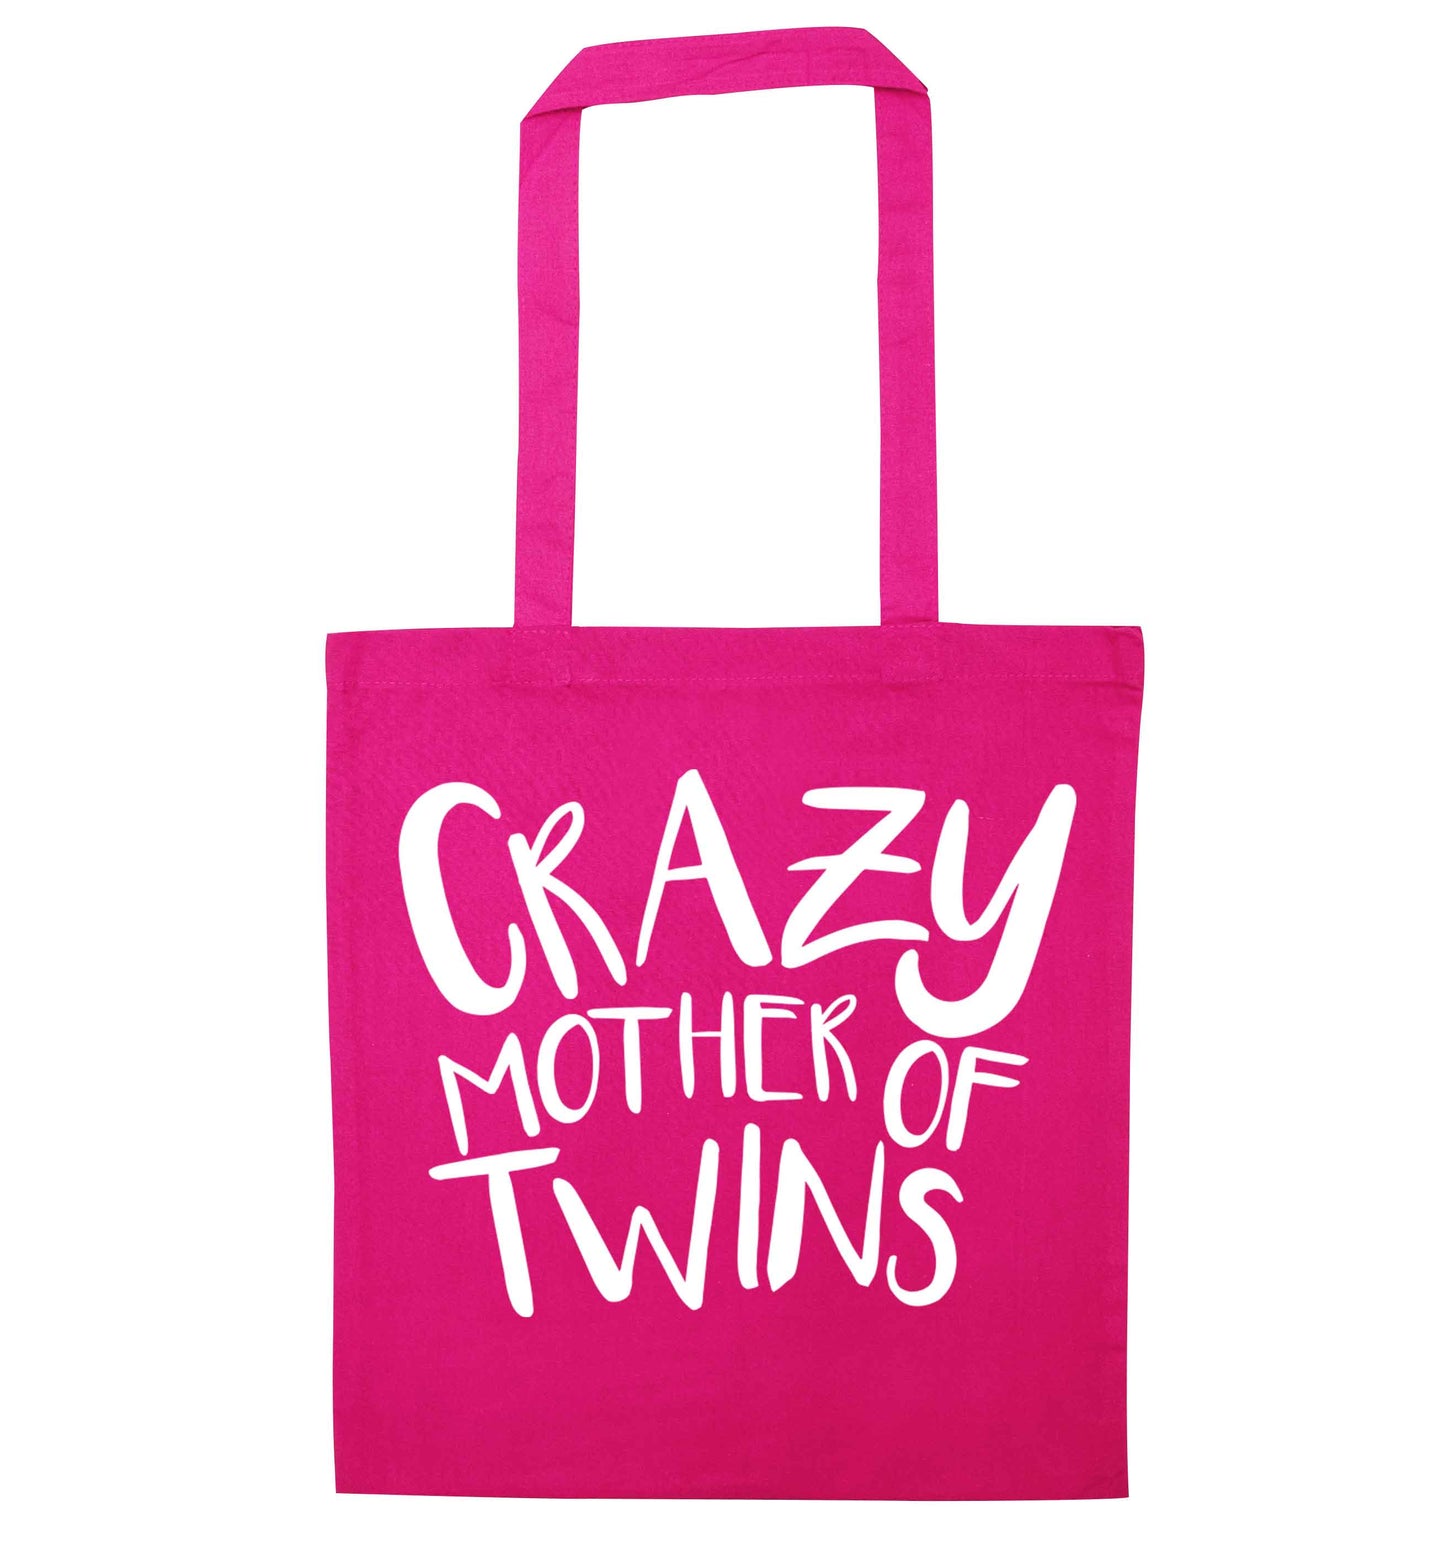 Crazy mother of twins pink tote bag